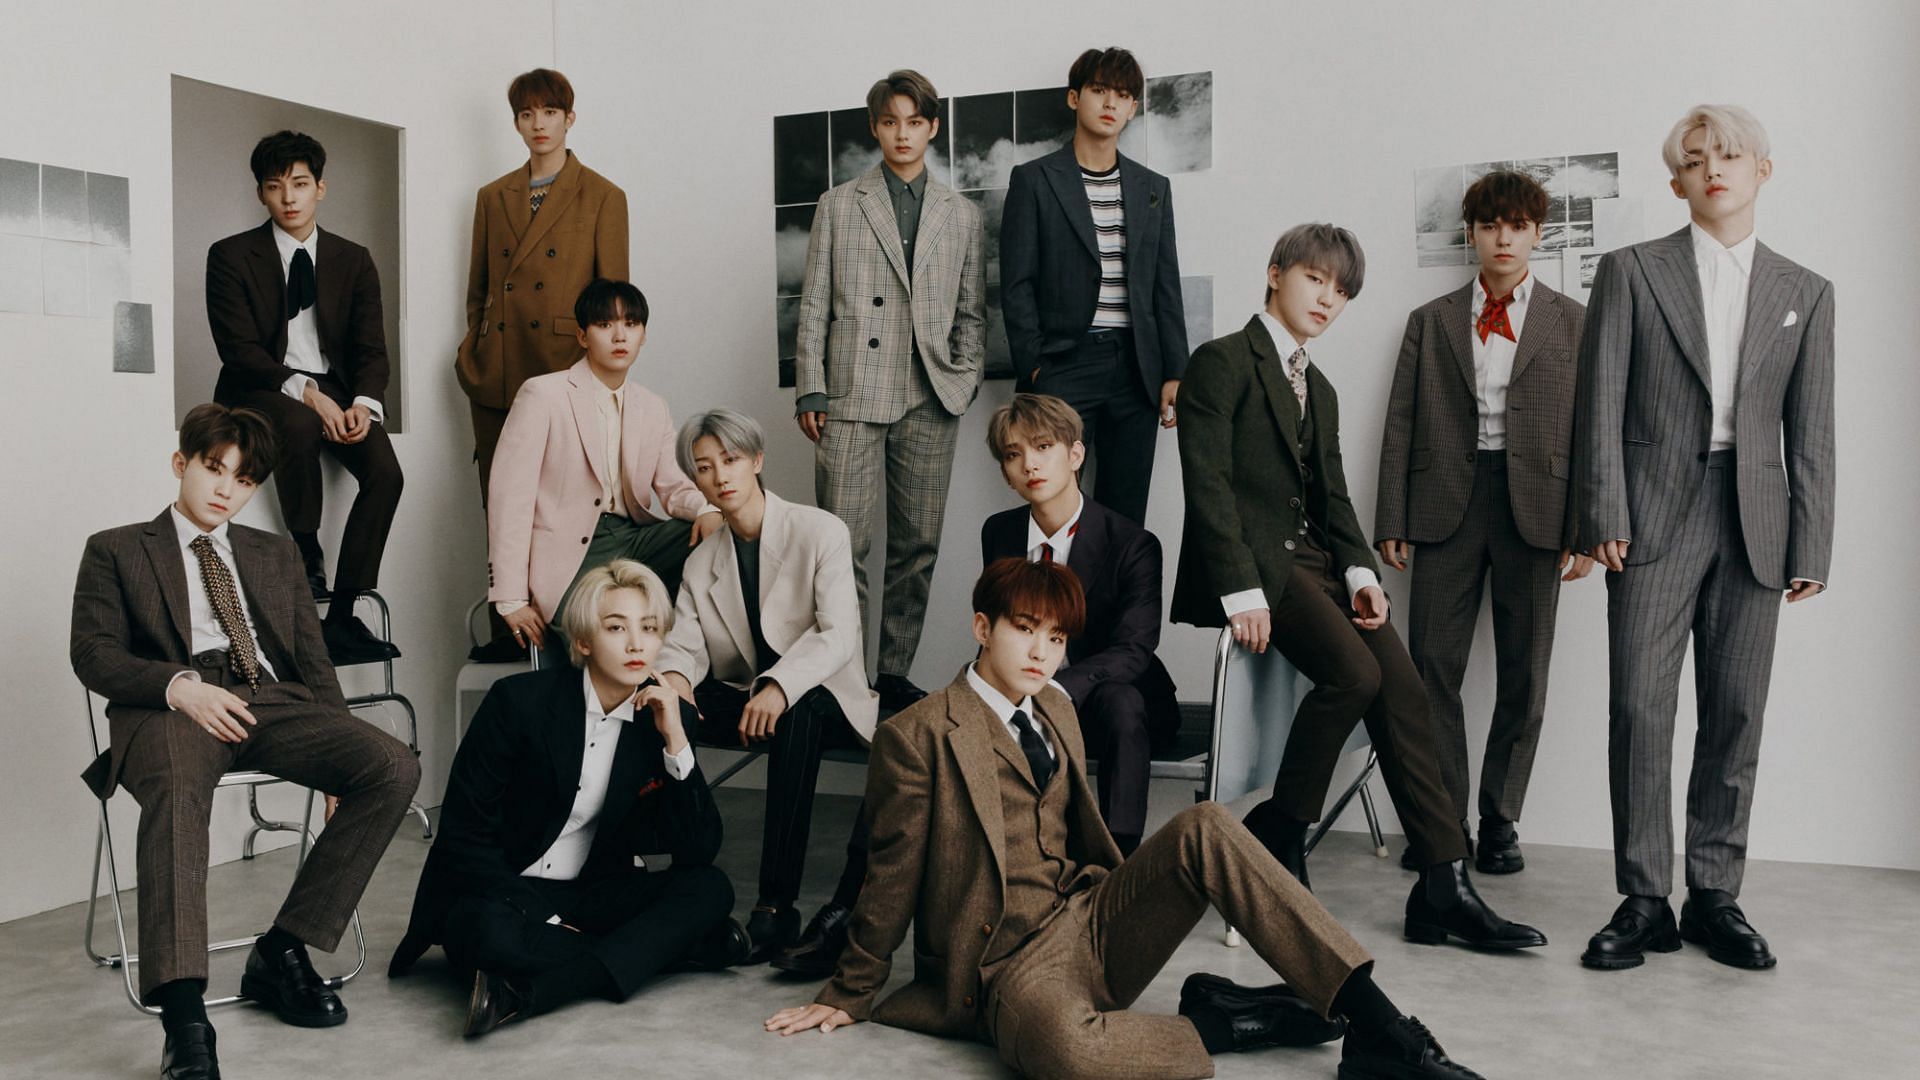 Seventeen makes history as it ranks as the only Korean act among the biggest names of the music industry (image via twitter and Kpop database)